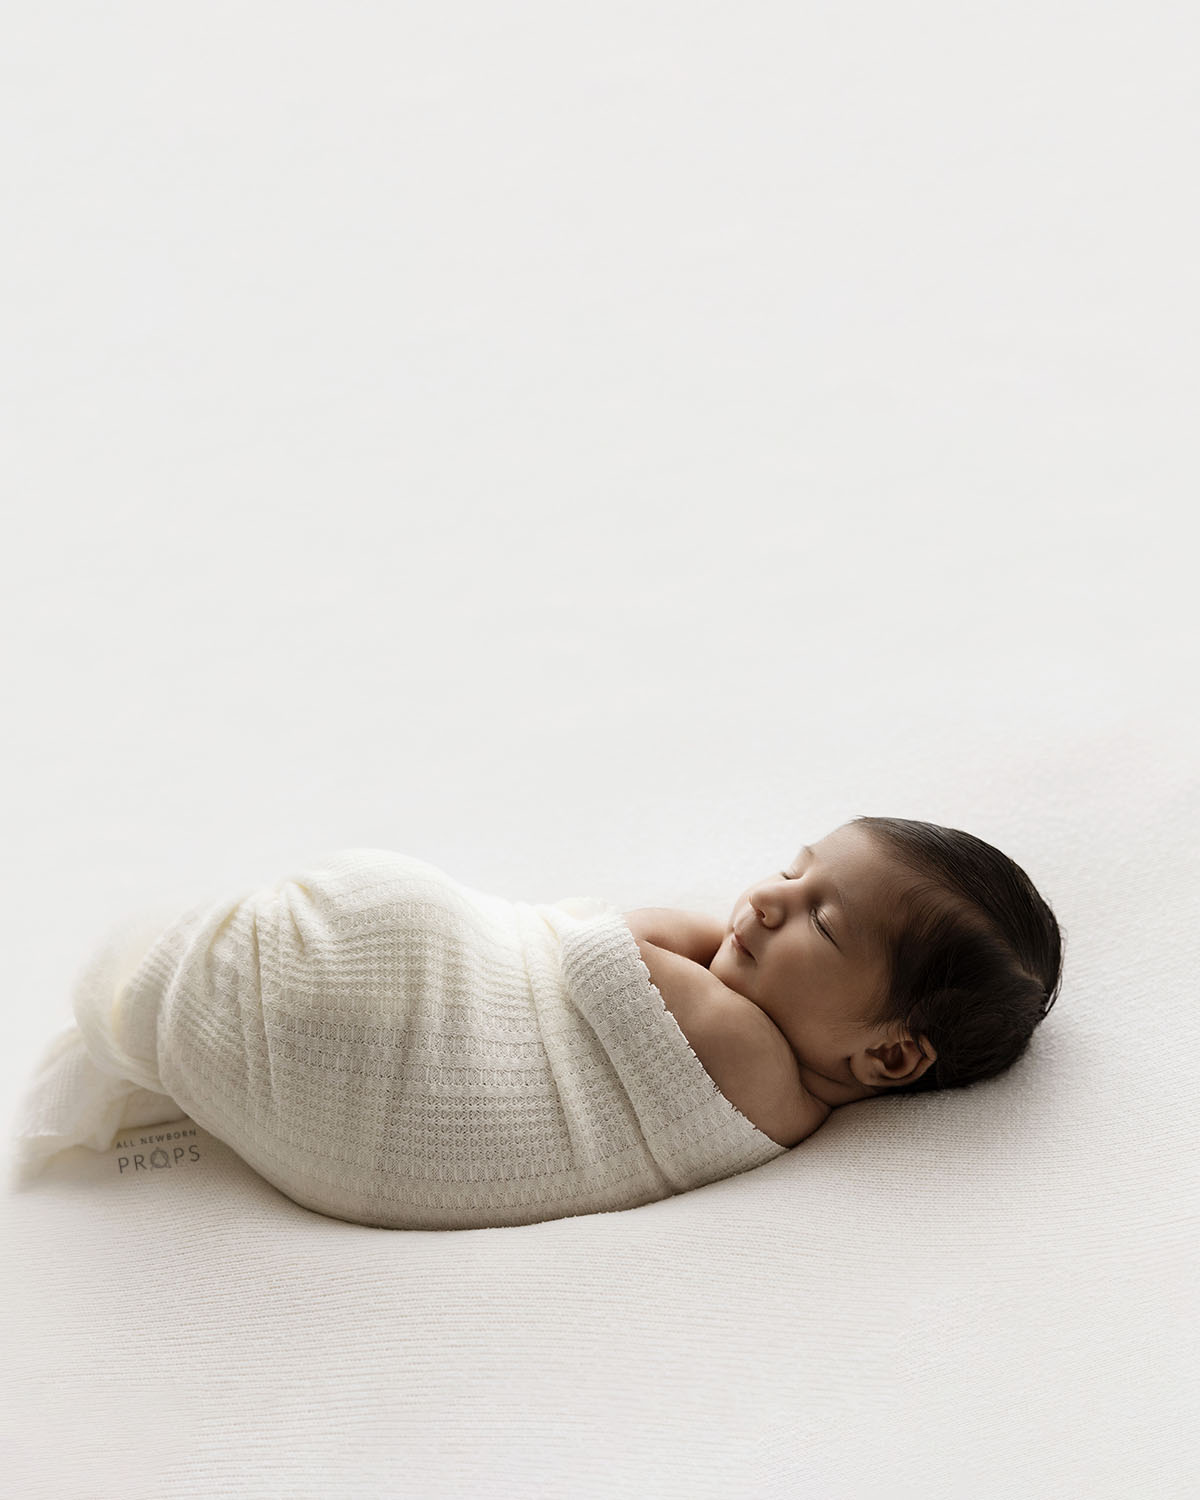 TiaoBug Newborn Baby Cheesecloth Wrap Cloth Blanket Wrap-Baby Photography Photo Props 